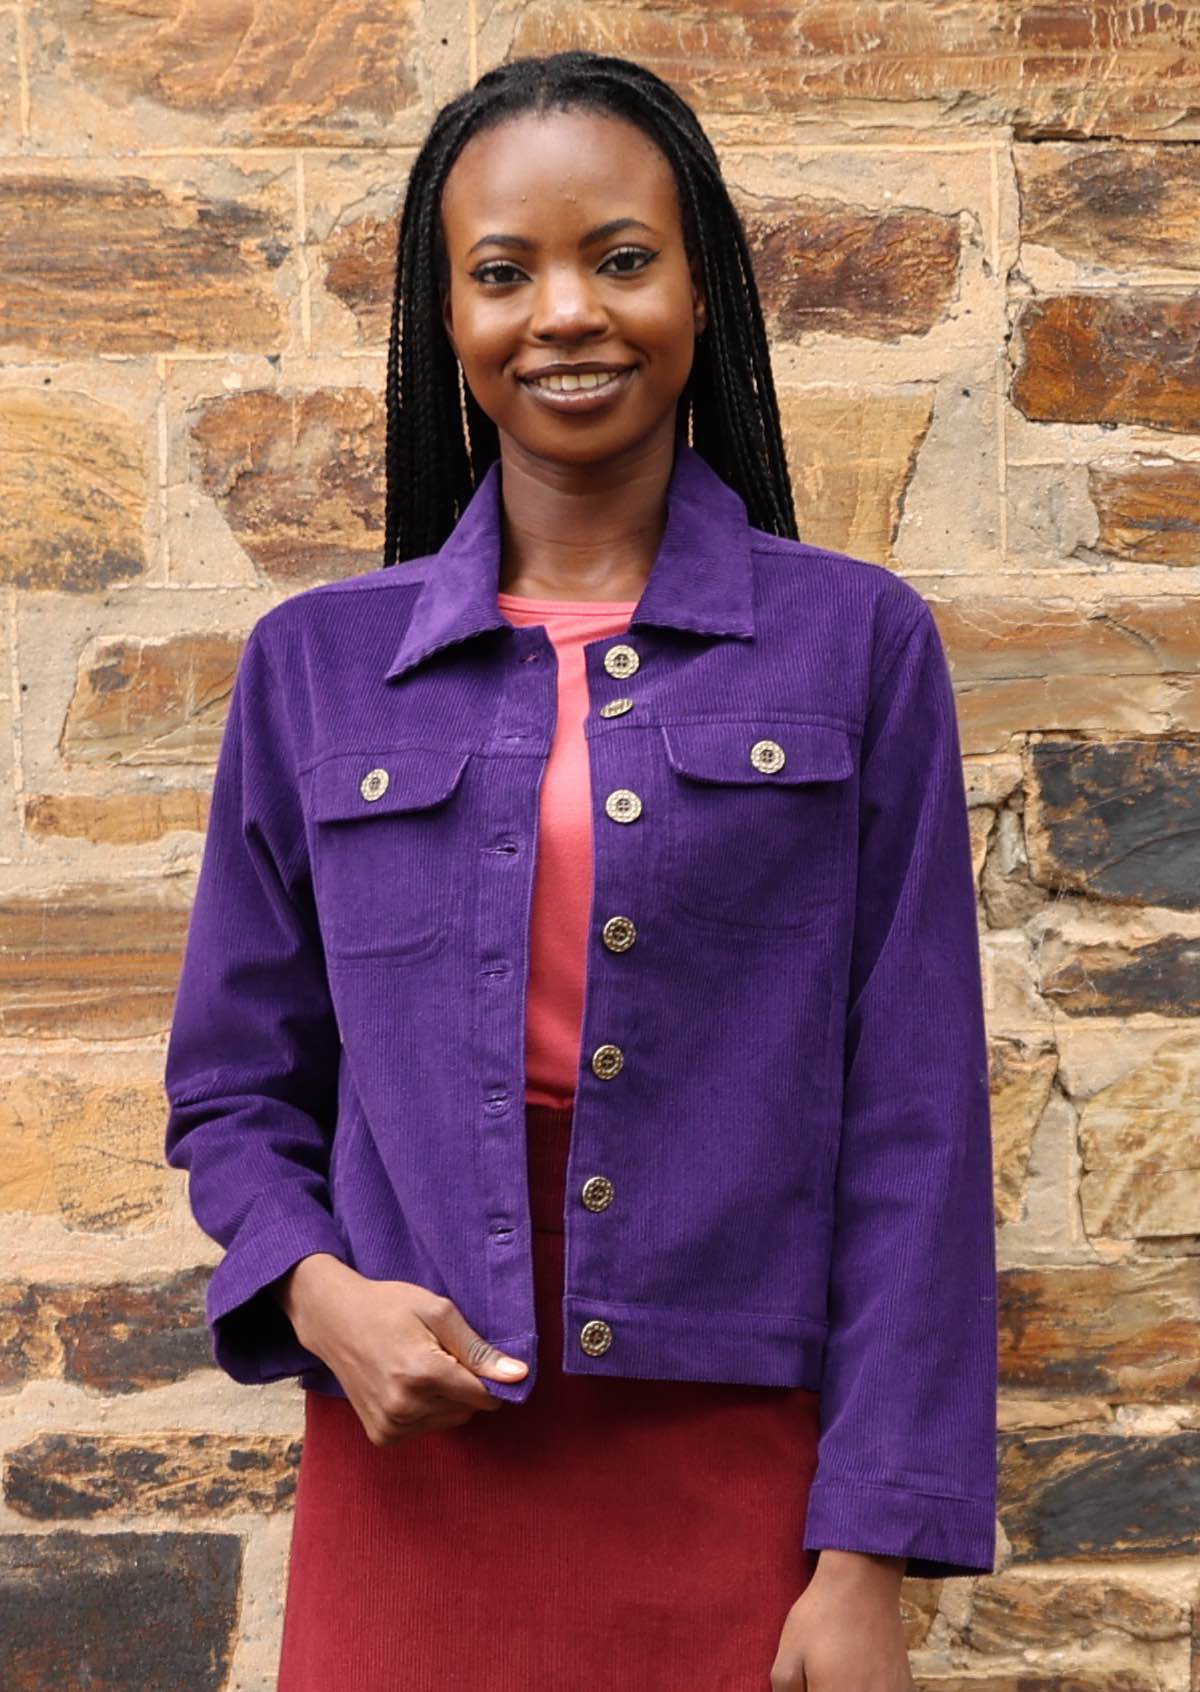 Cotton corduroy jacket in bright purple with brass buttons